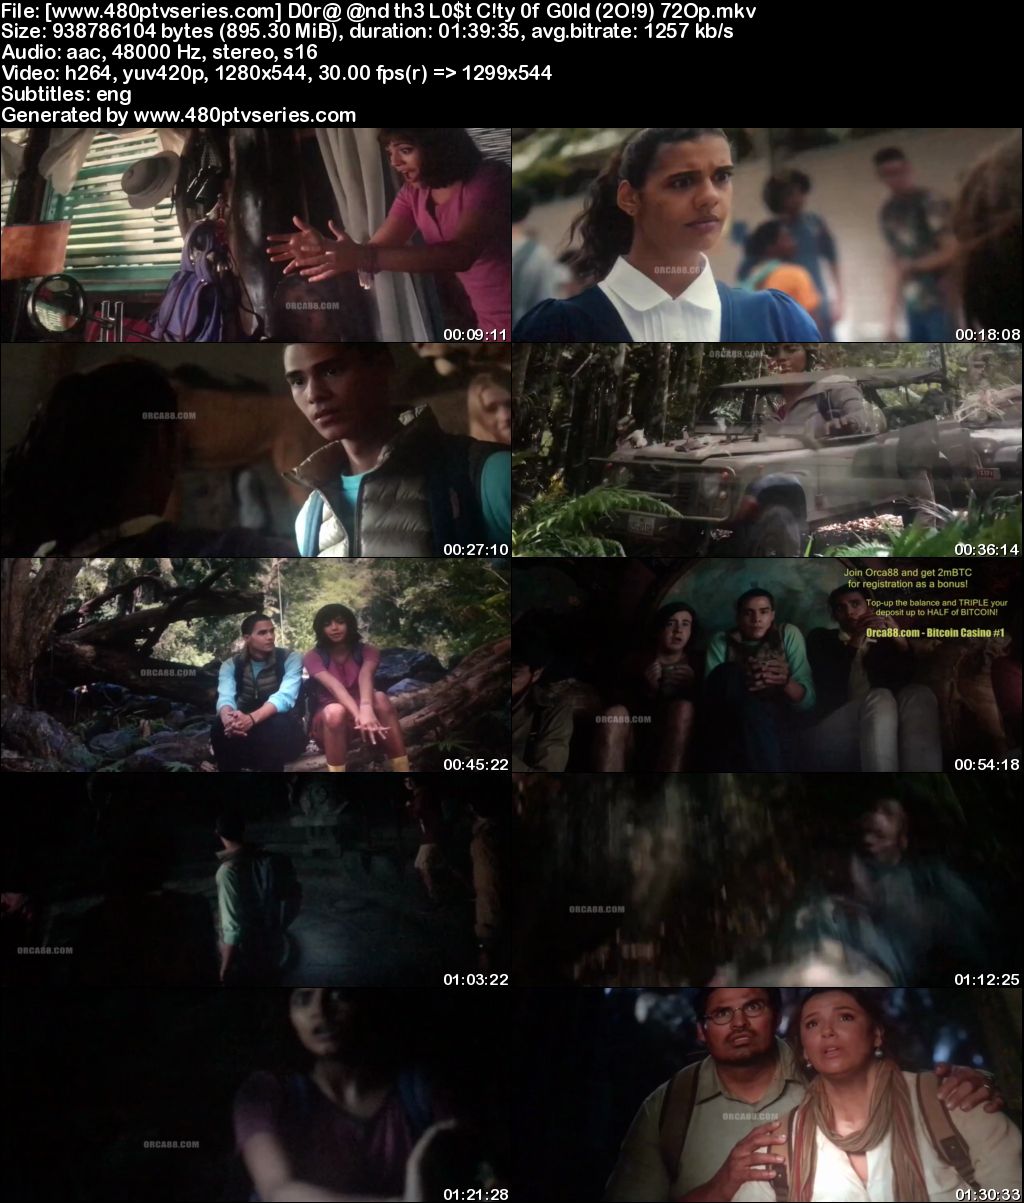 Download Dora and the Lost City of Gold (2019) 900MB Full English Movie Download 720p HDCAM Free Watch Online Full Movie Download Worldfree4u 9xmovies